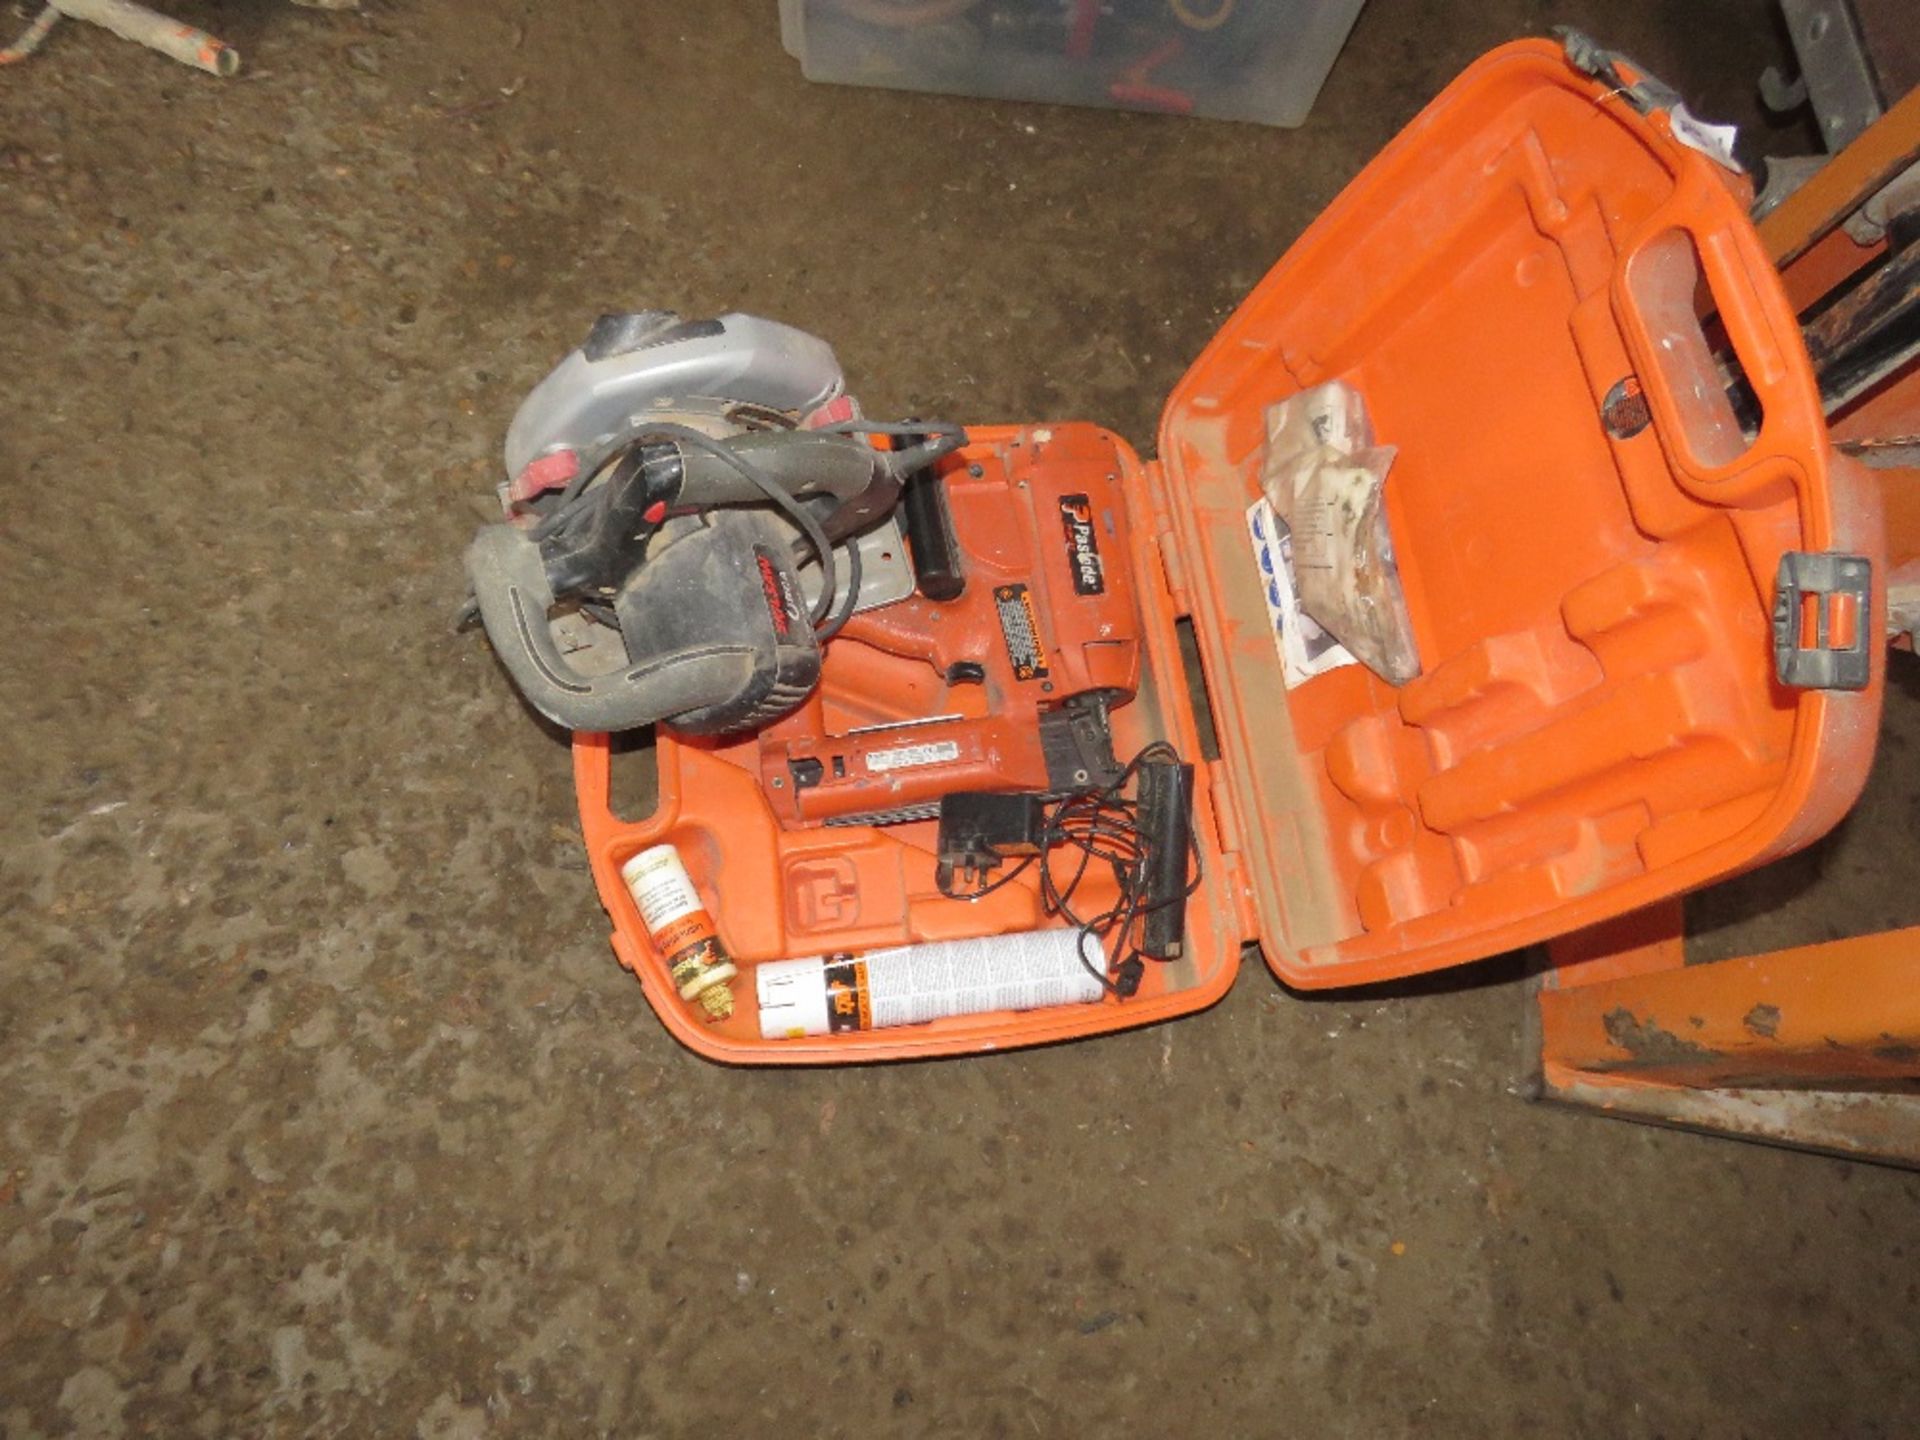 PASLODE SECOND FIX NAIL GUN PLUS SKIL SAW, 240VOLT. THIS LOT IS SOLD UNDER THE AUCTIONEERS MARGIN SC - Image 2 of 2